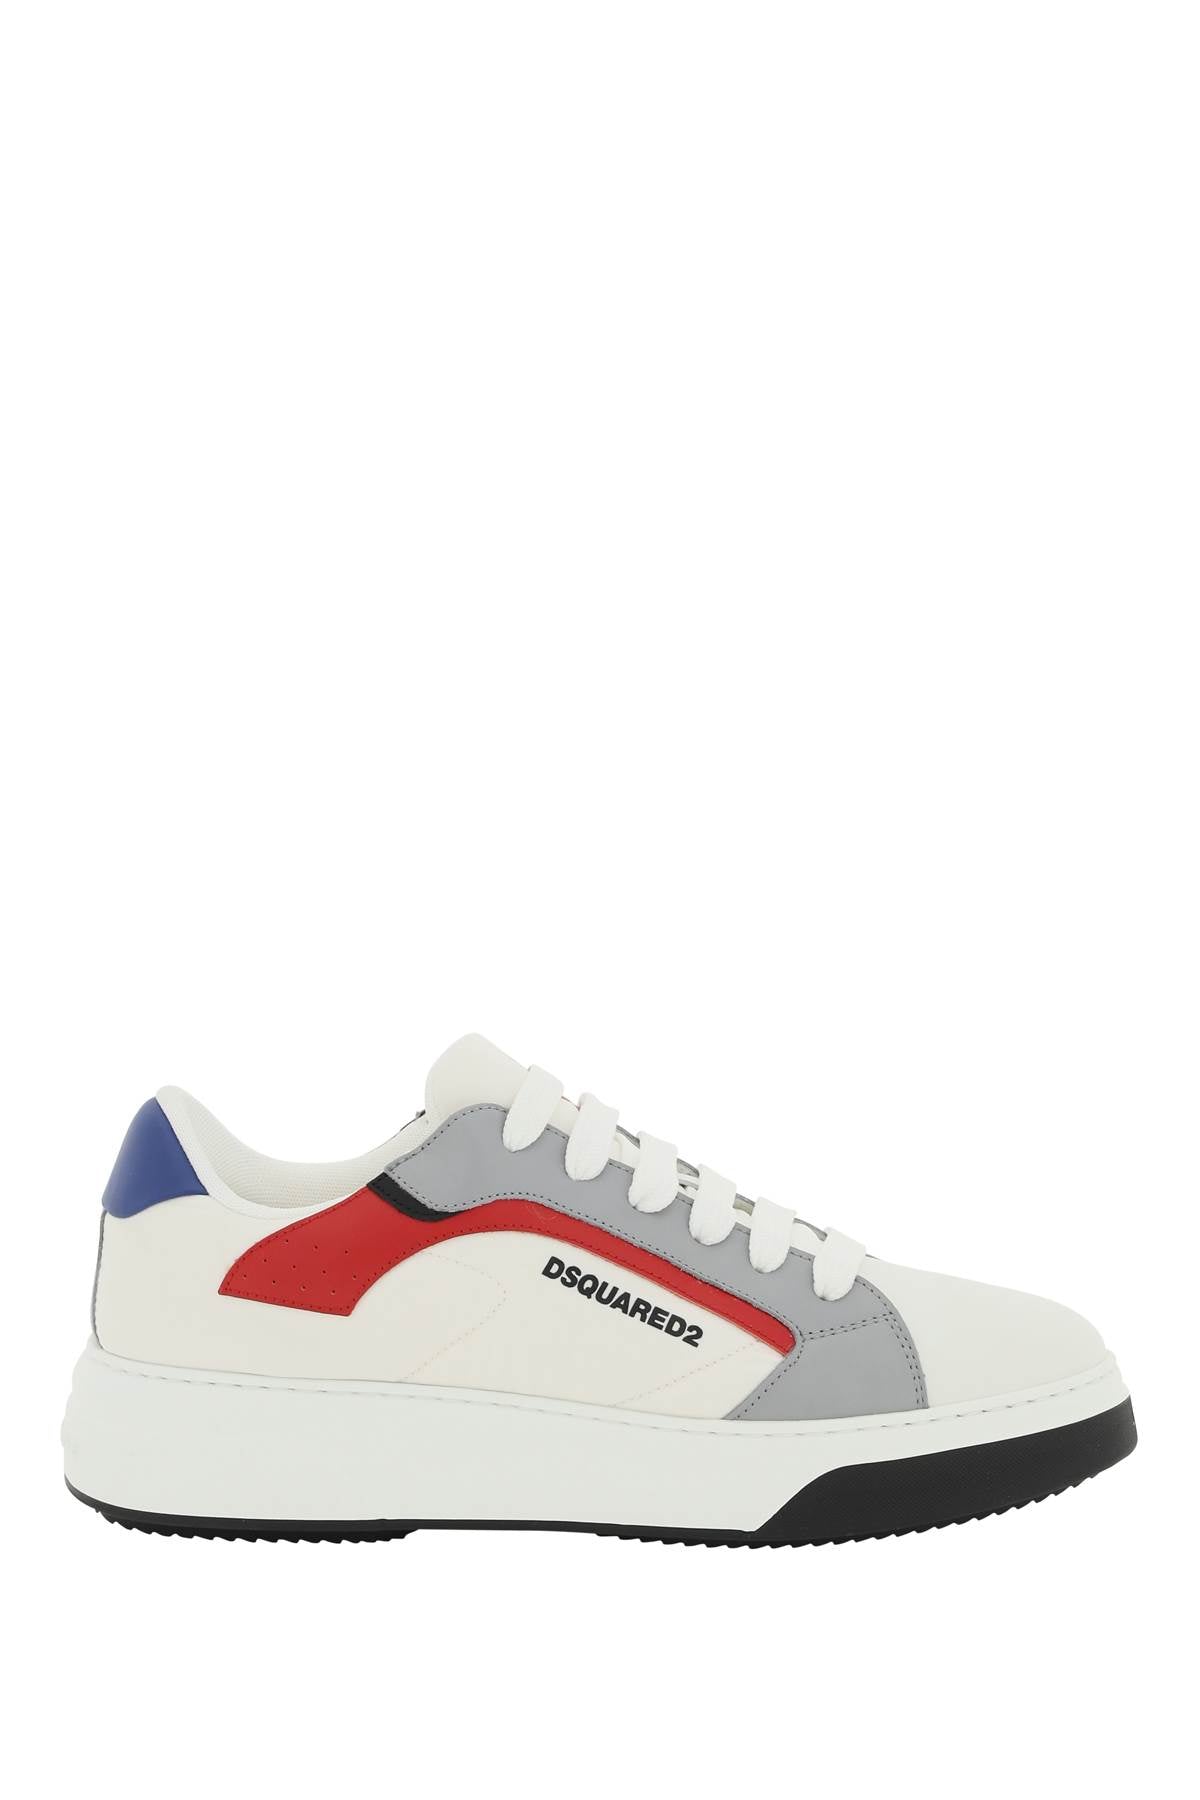 DSQUARED2 BUMPER LACE-UP LOW TOP Sneaker